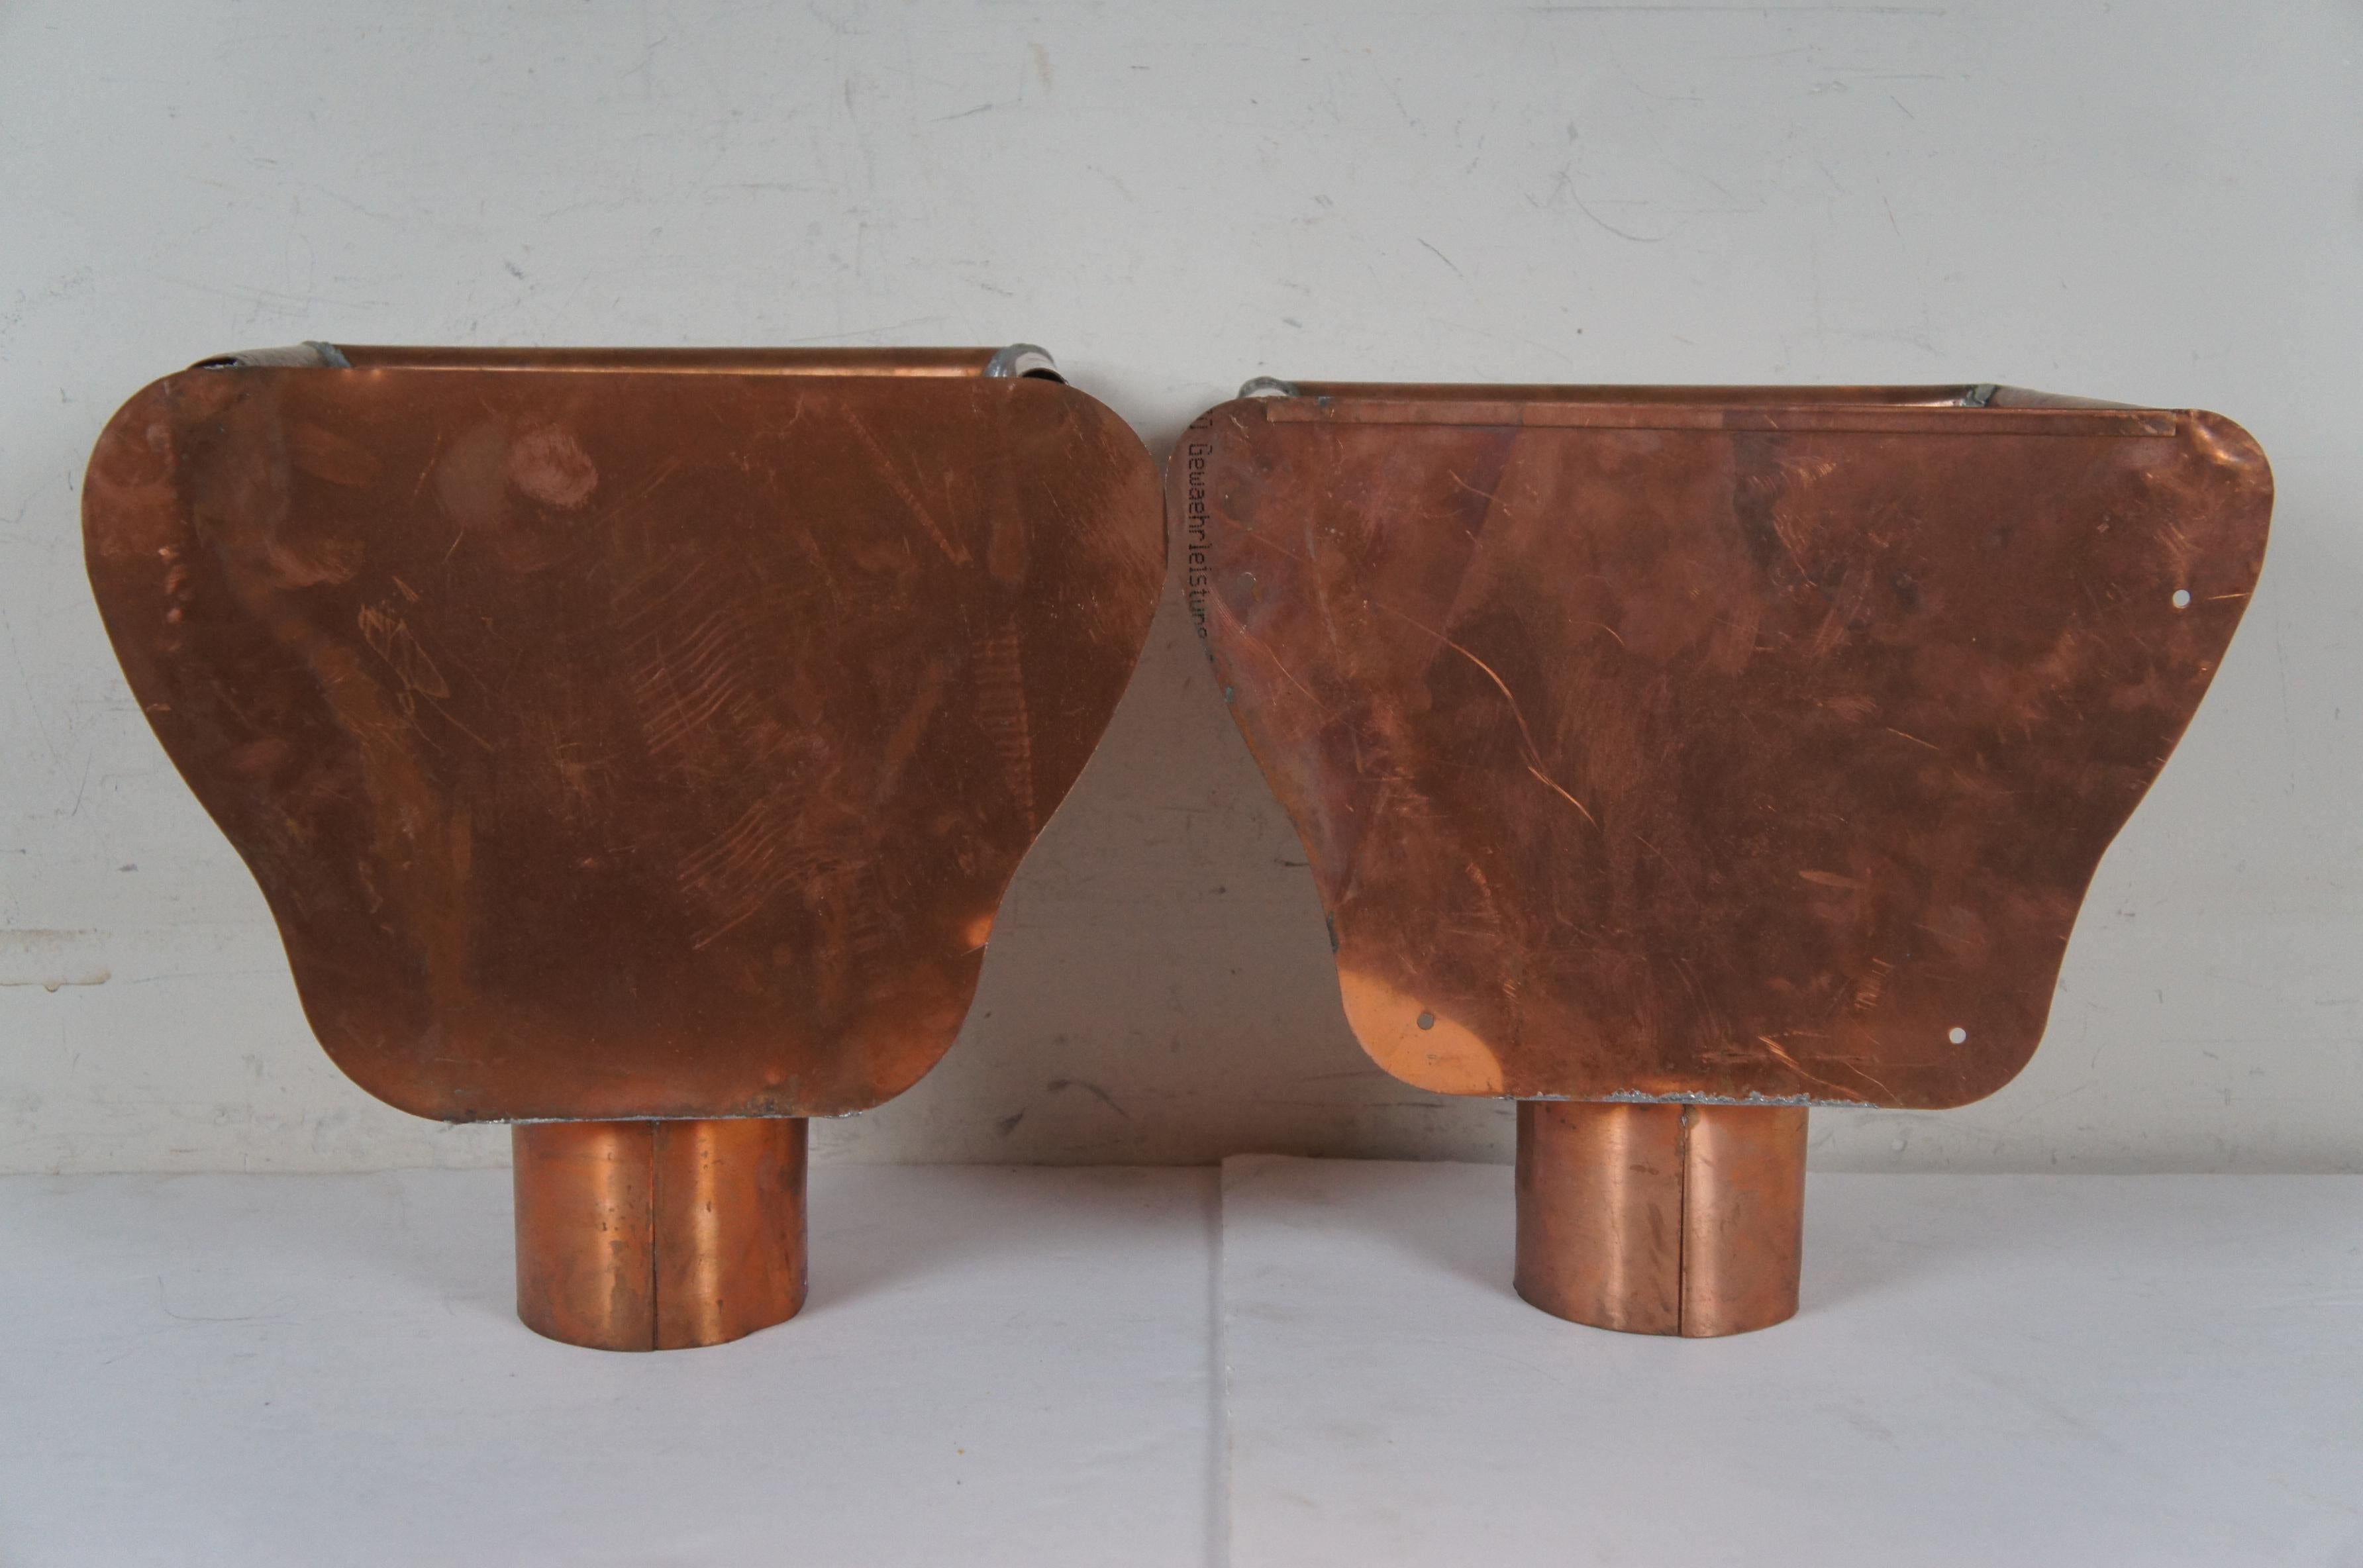 2 Vintage Copper Gutter Leader Box Heads w/ Overflow Pipe Outlet Downspout 13